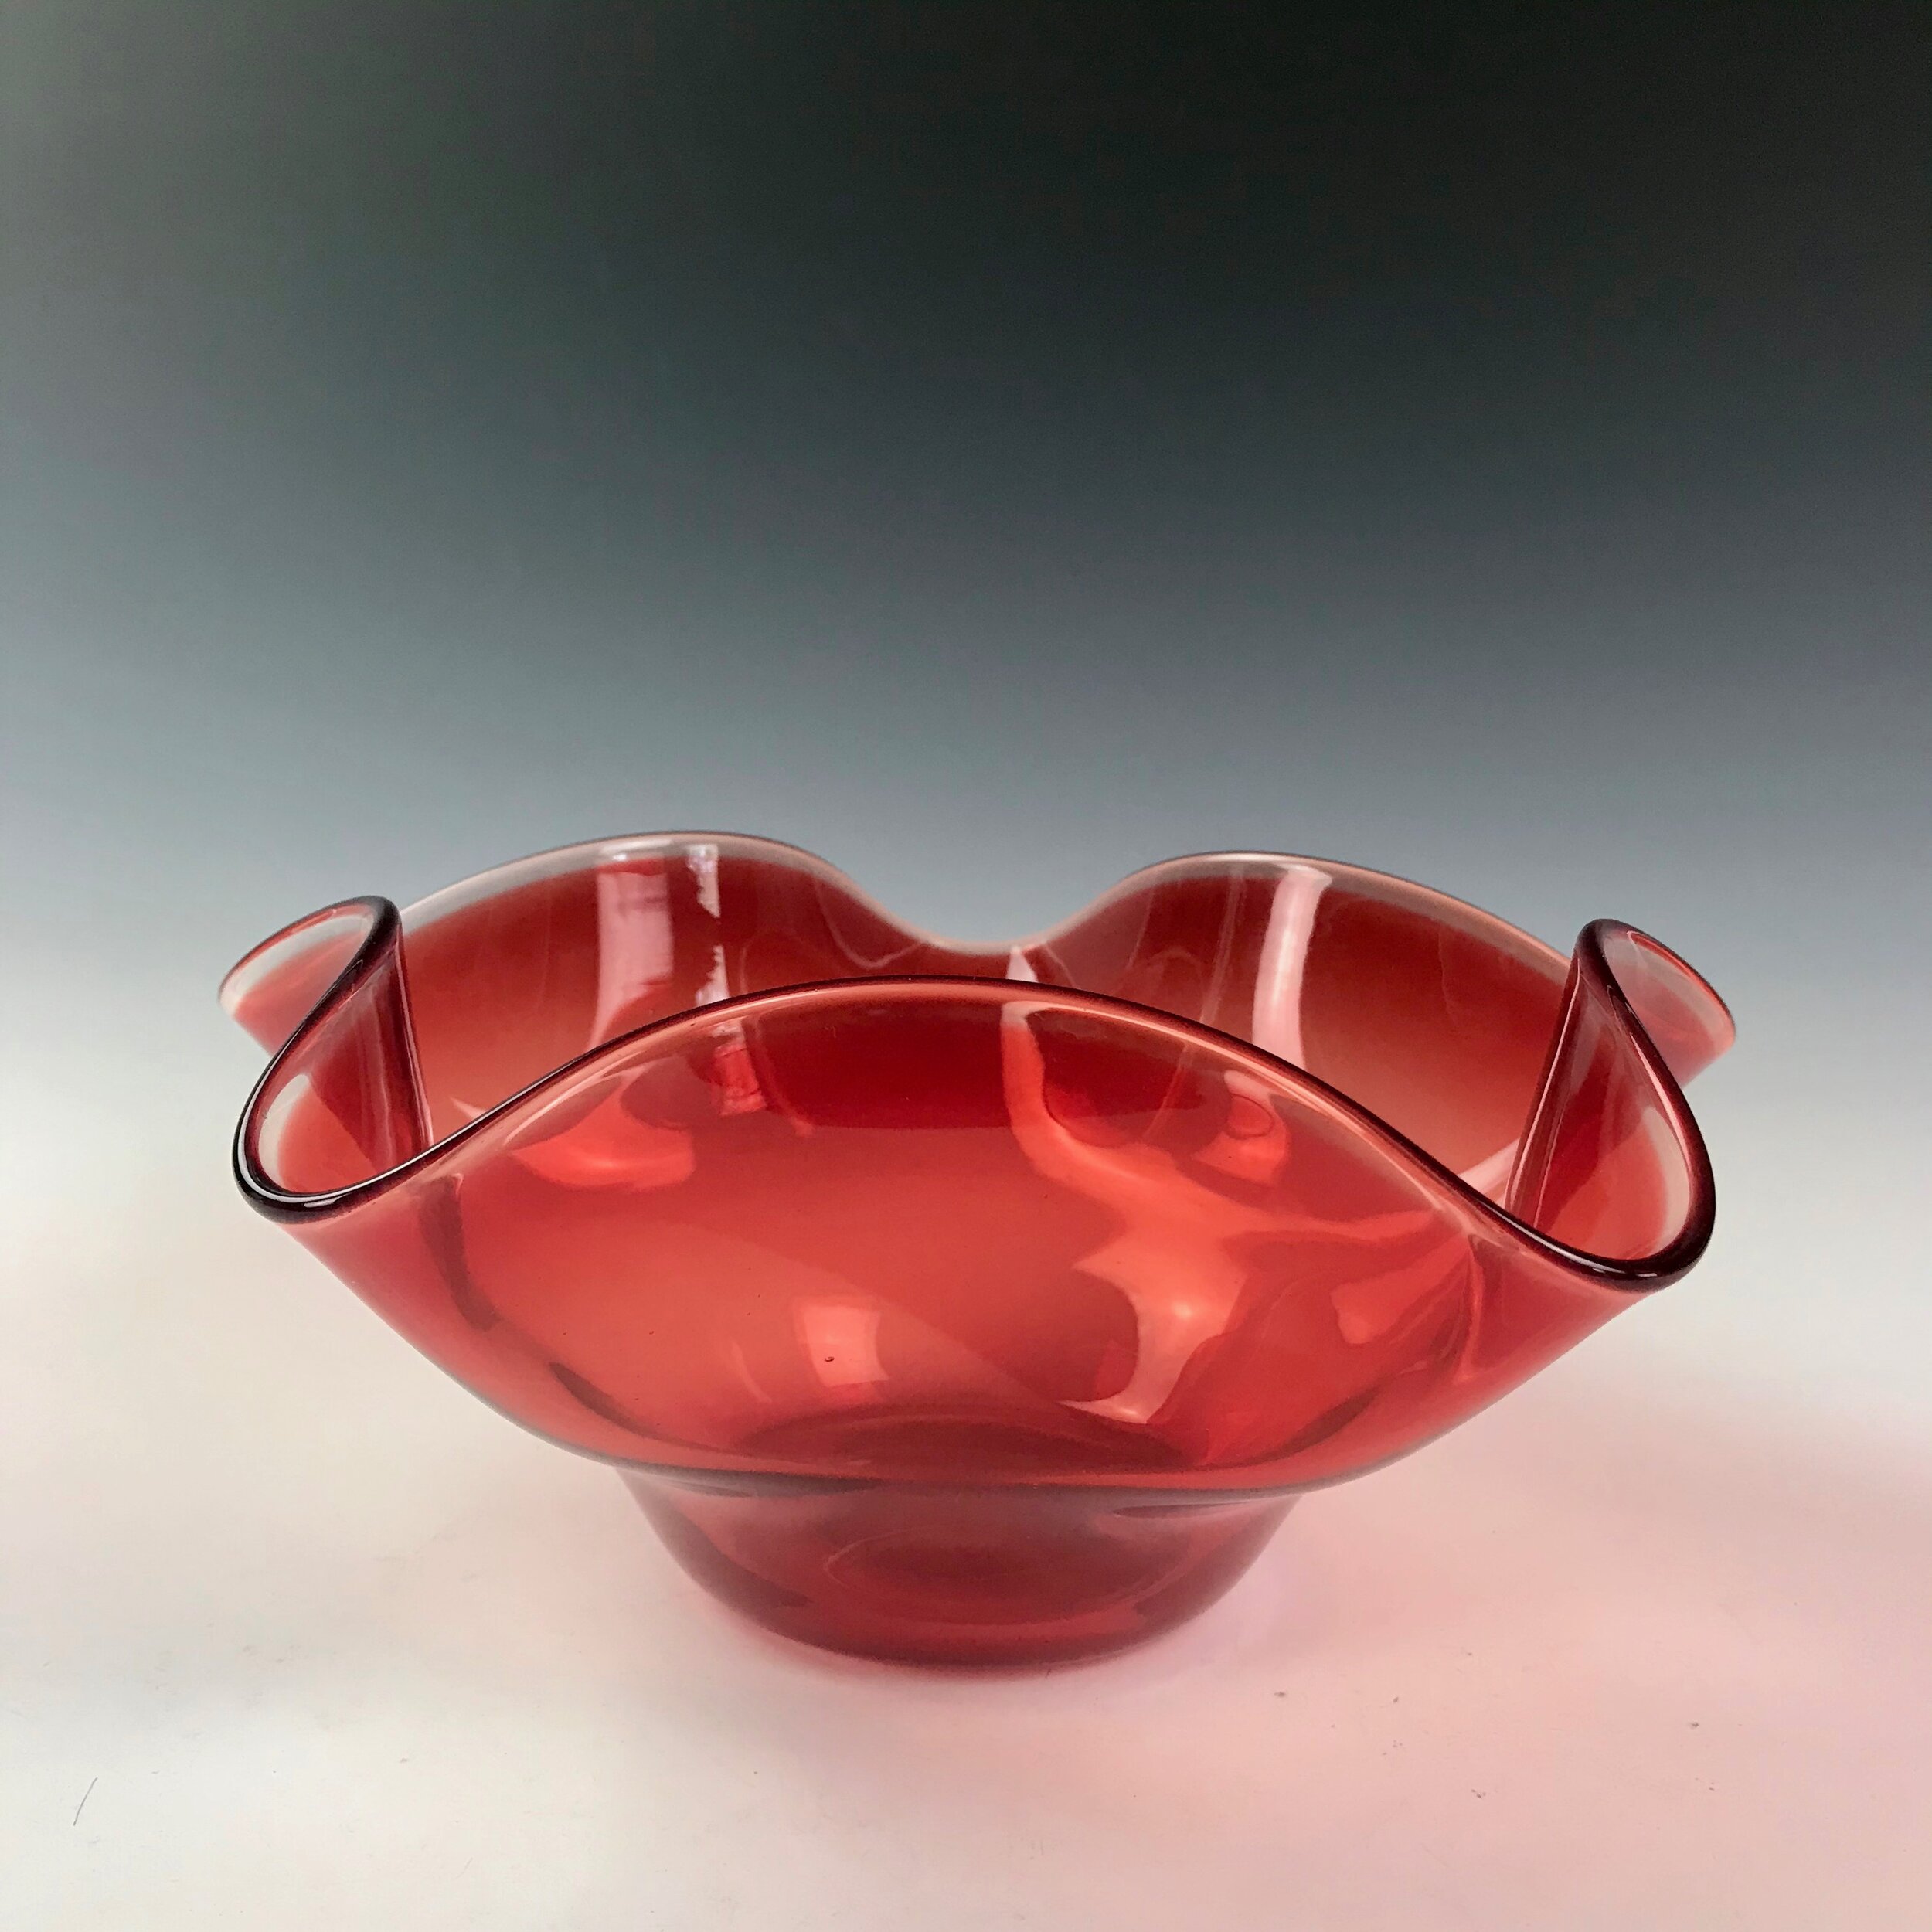 Handblown Glass Bowl - Large - 11 1/2 - The Foundry Home Goods